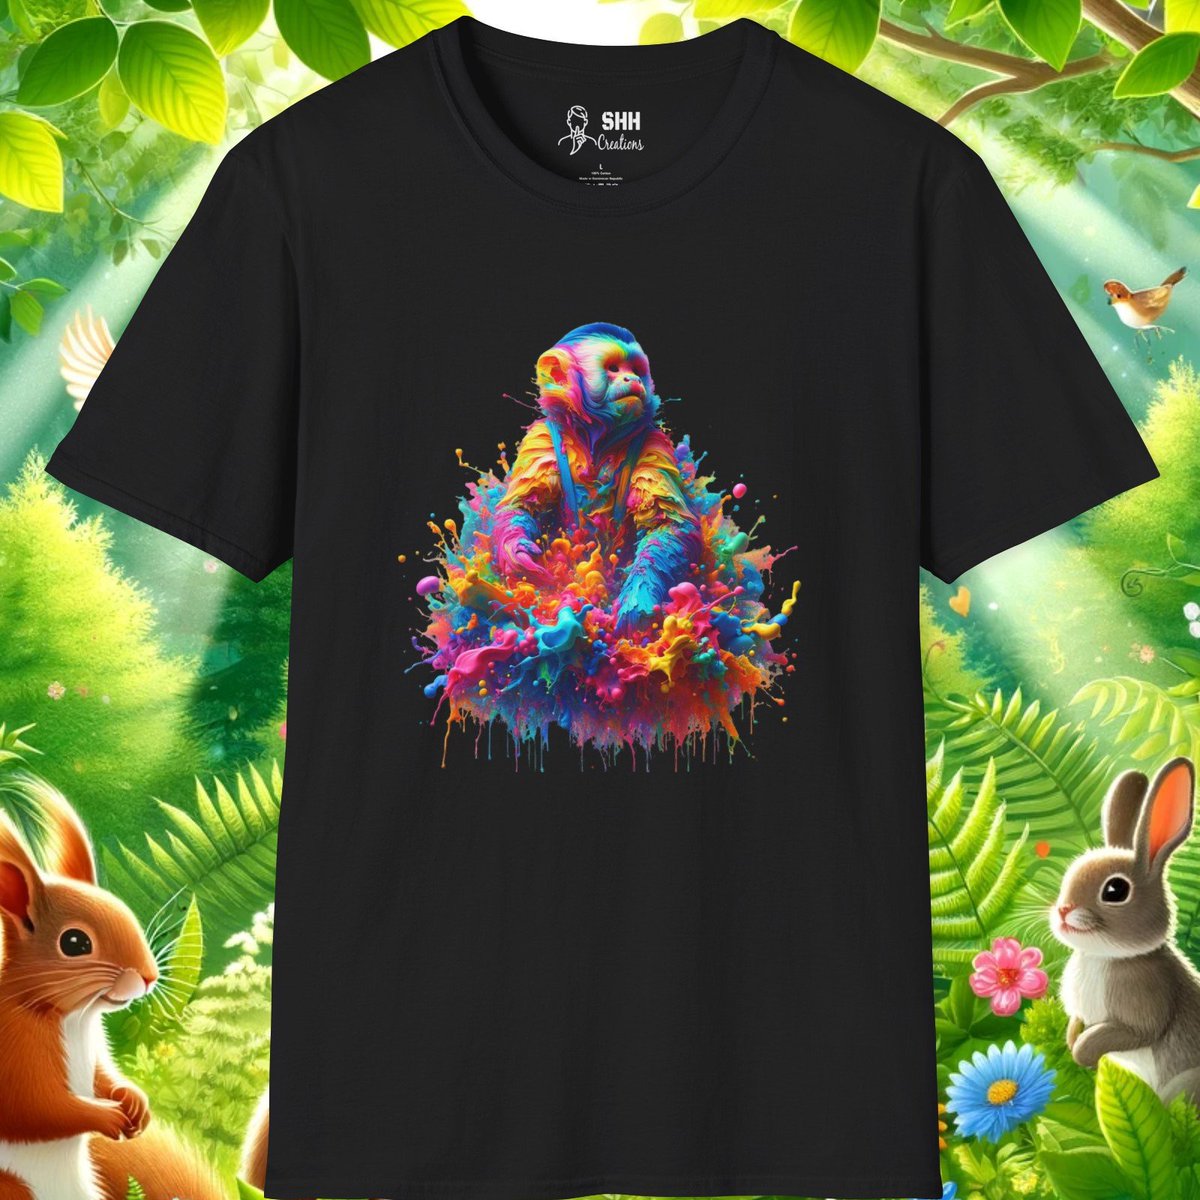 Unleash your inner wild with our Psychedelic Capuchin Monkey T-Shirt! 🌈🐒 It's more than just apparel; it's a vibrant statement. Ready to wear your wild? #ColorExplosion #MonkeyTee #PsychedelicLook

shhcreations.com/products/psych…